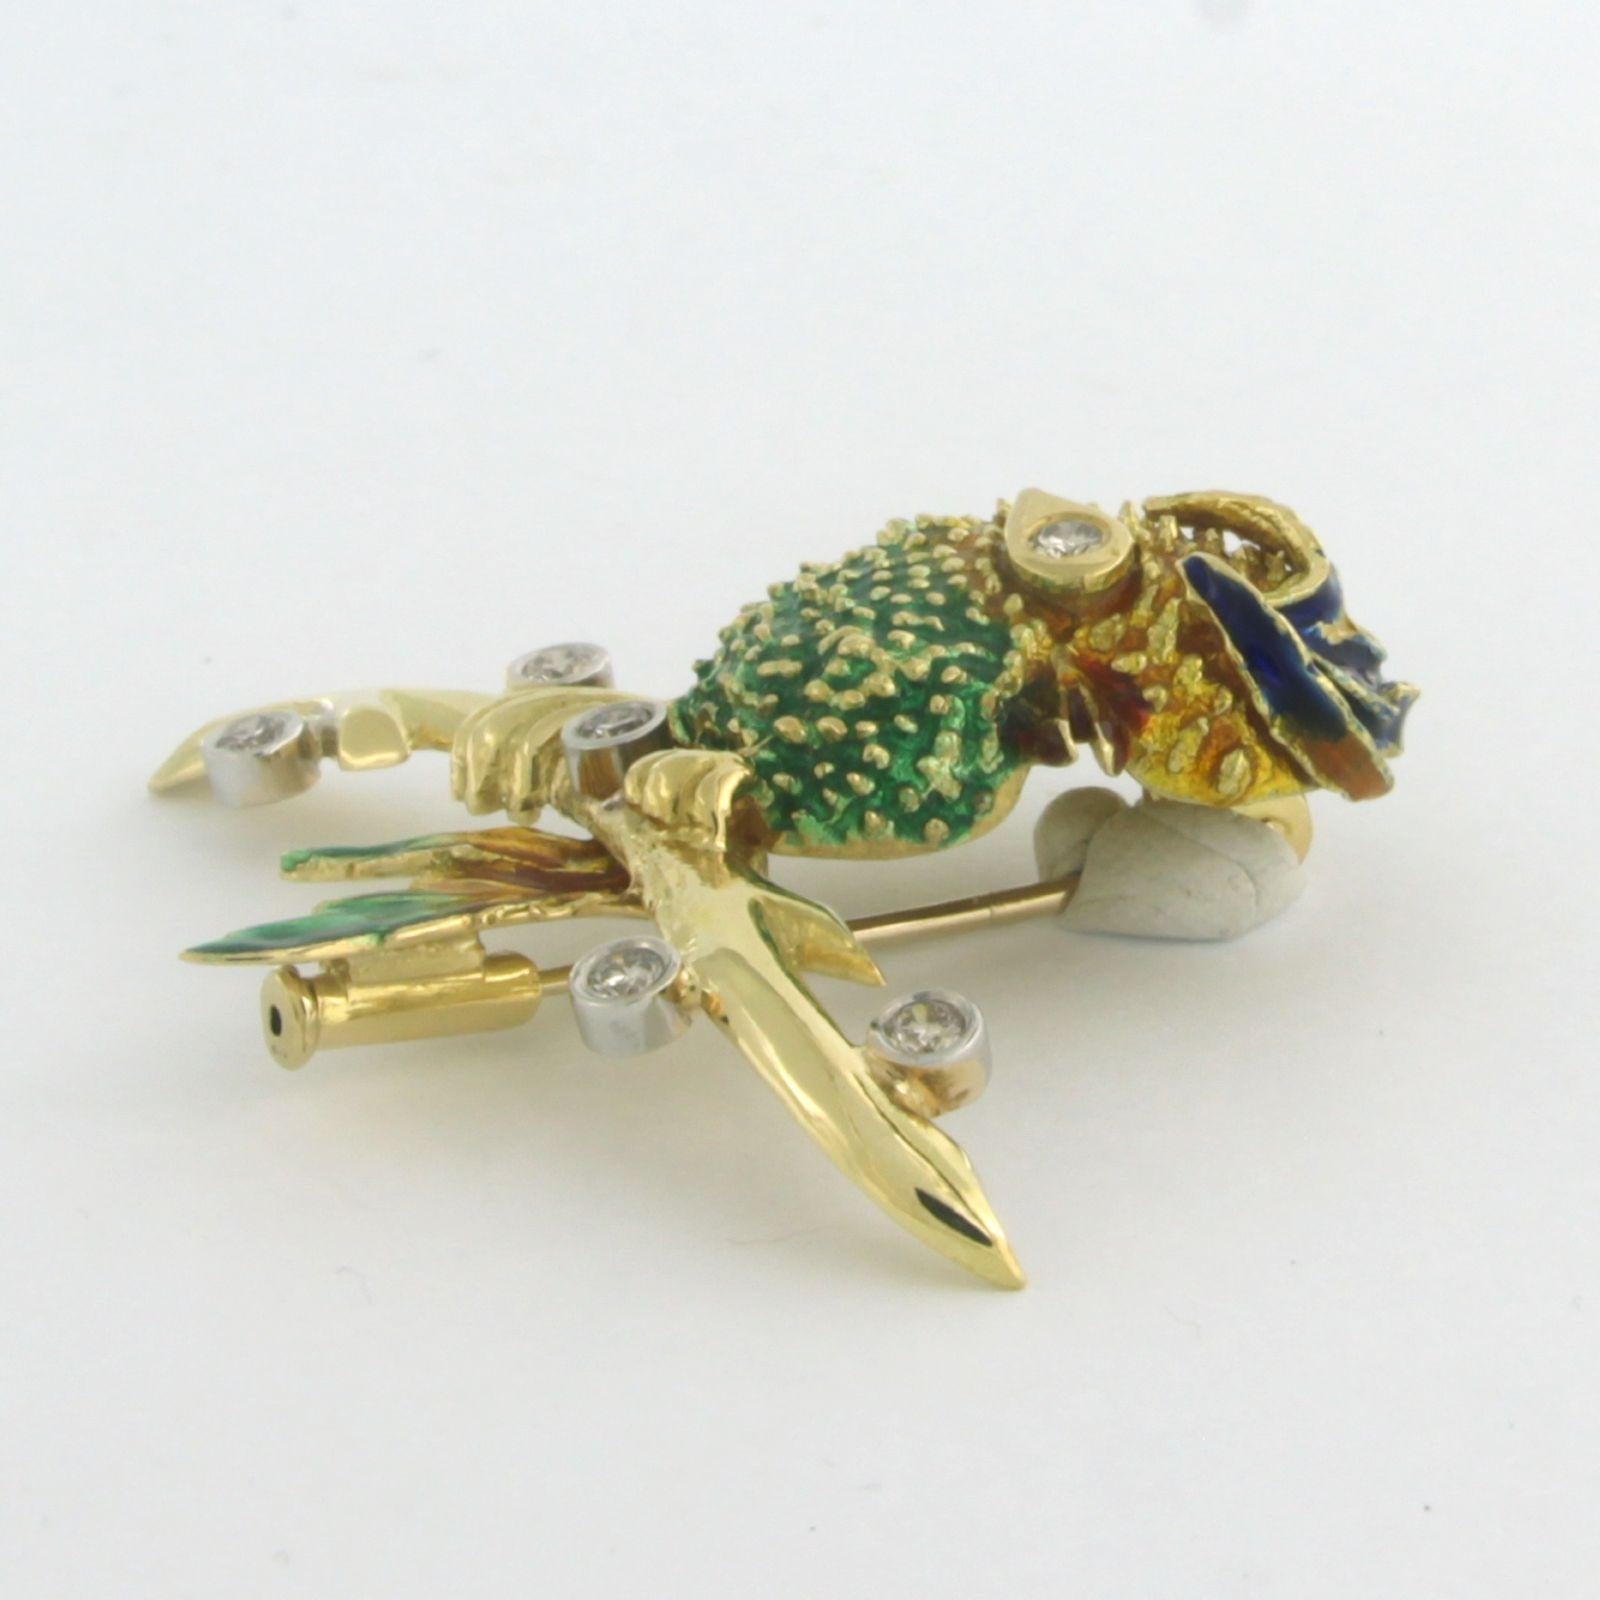 18k bicolour gold bird brooch with green, brown, red and blue enamel and brilliant cut diamond, approximately 0.20 carats in total G/H VS/SI

Detailed description

the brooch is 3.8 cm high and 4.0 cm wide

Weight: 13.6 grams

occupied with:

- 6 x